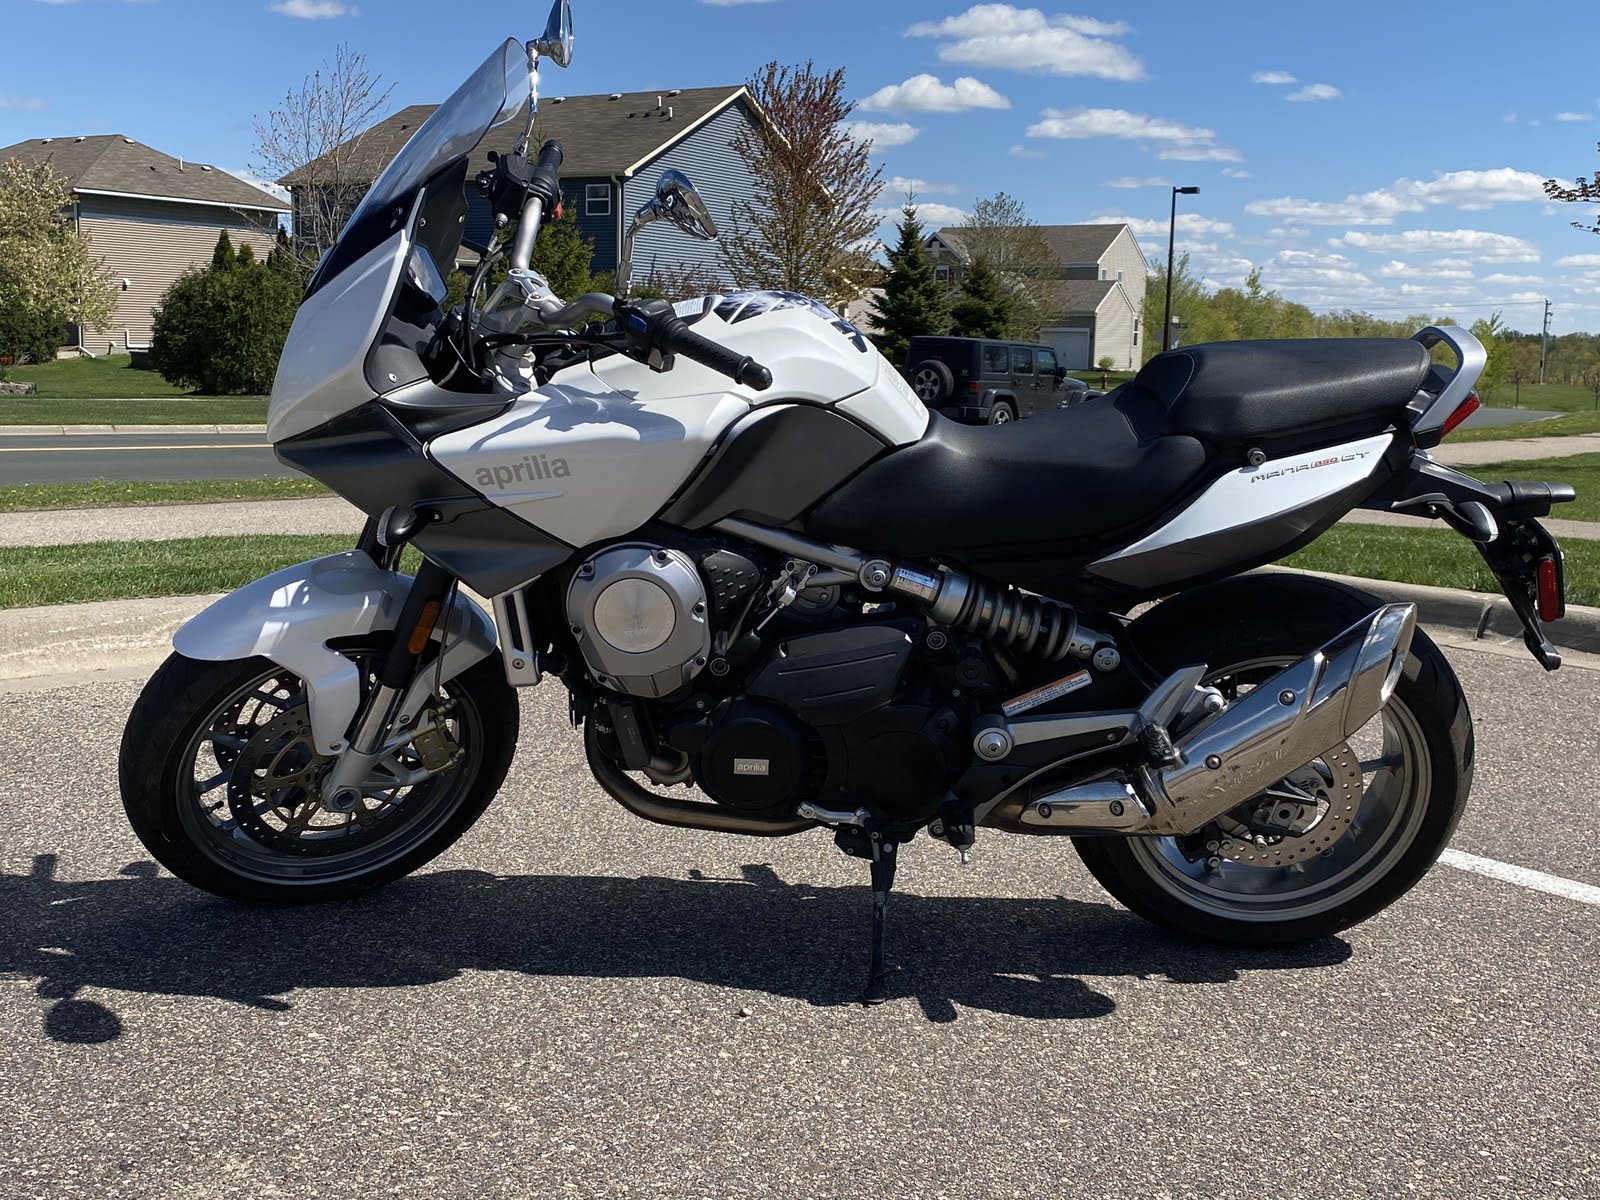 Shopping & Pricing Questions - Can I POST and sell a motorcycle on car